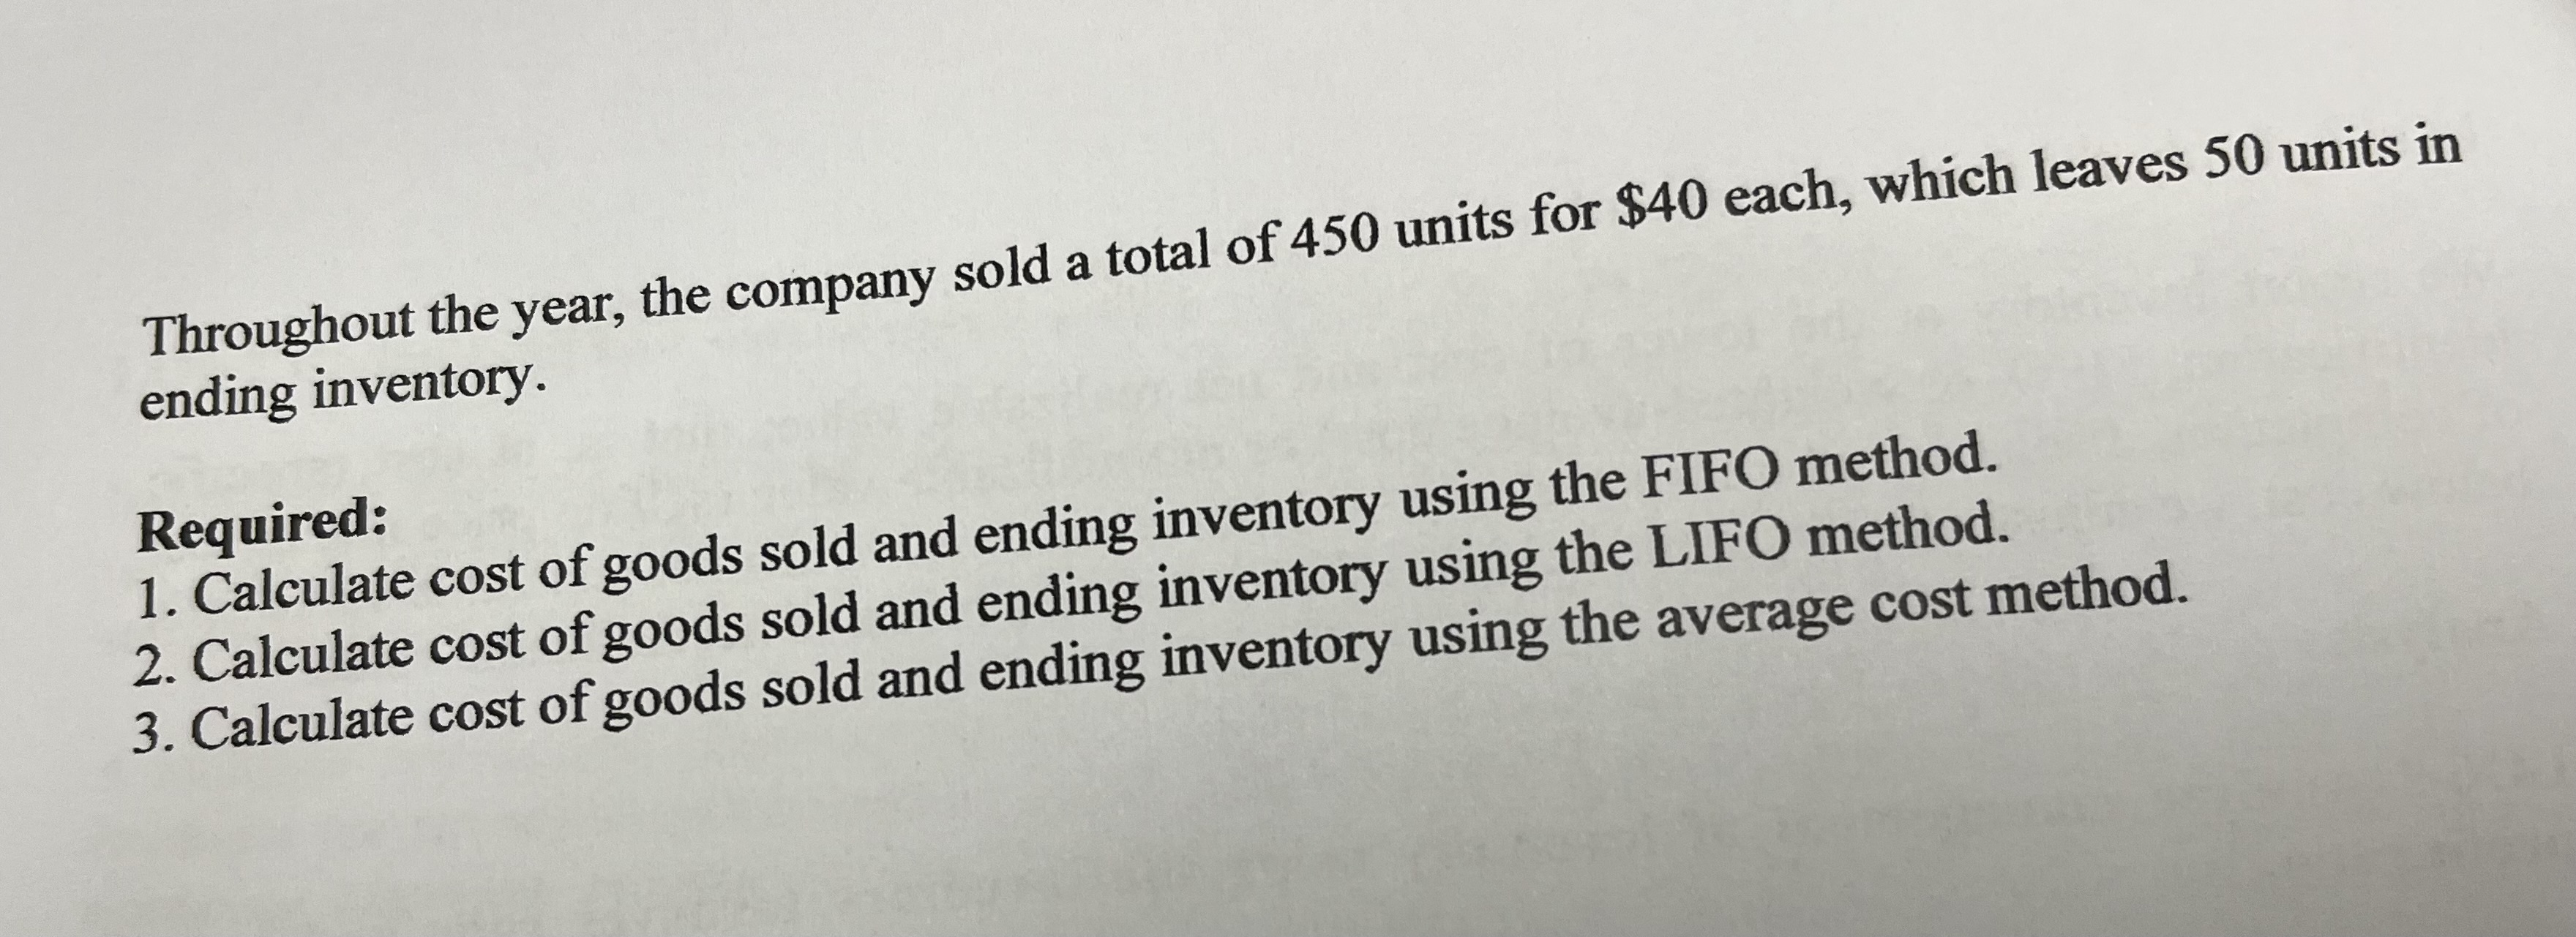 Throughout the year, the company sold a total of 450 units for $40 each, which leaves 50 units in ending